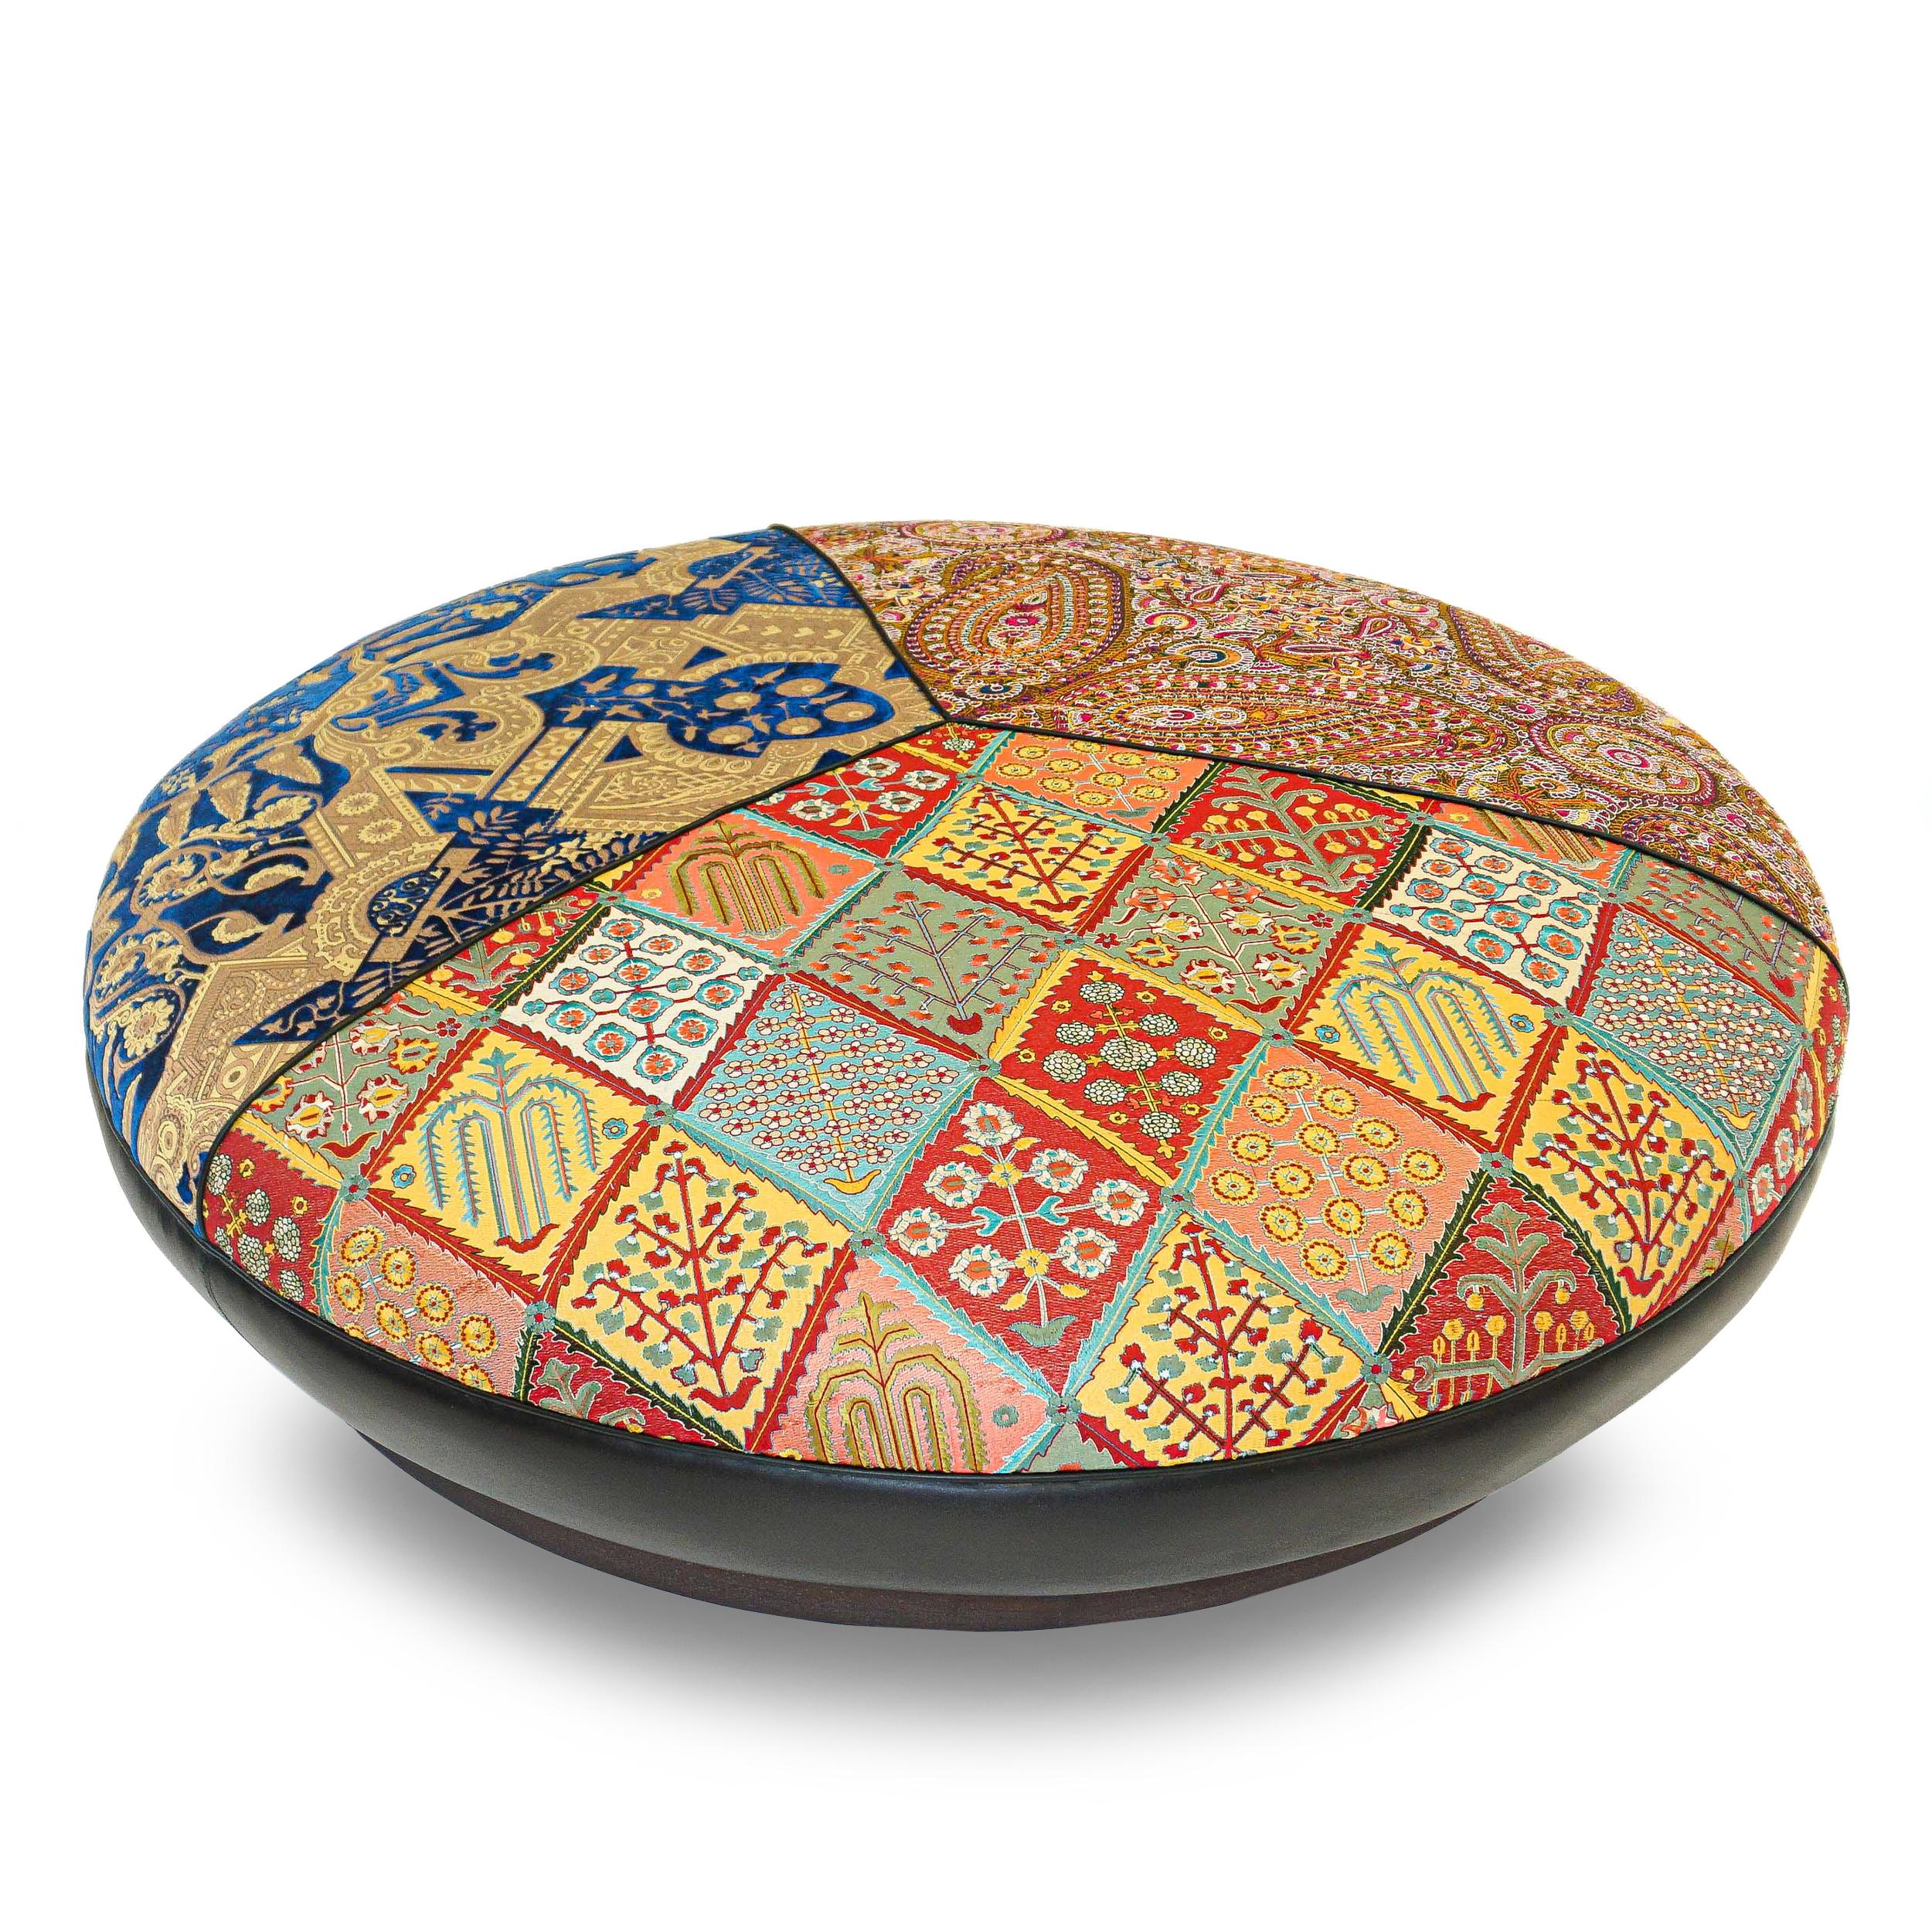 Large Round Upholstered Moroccan-Inspired Ottoman, Customizable For Sale 1